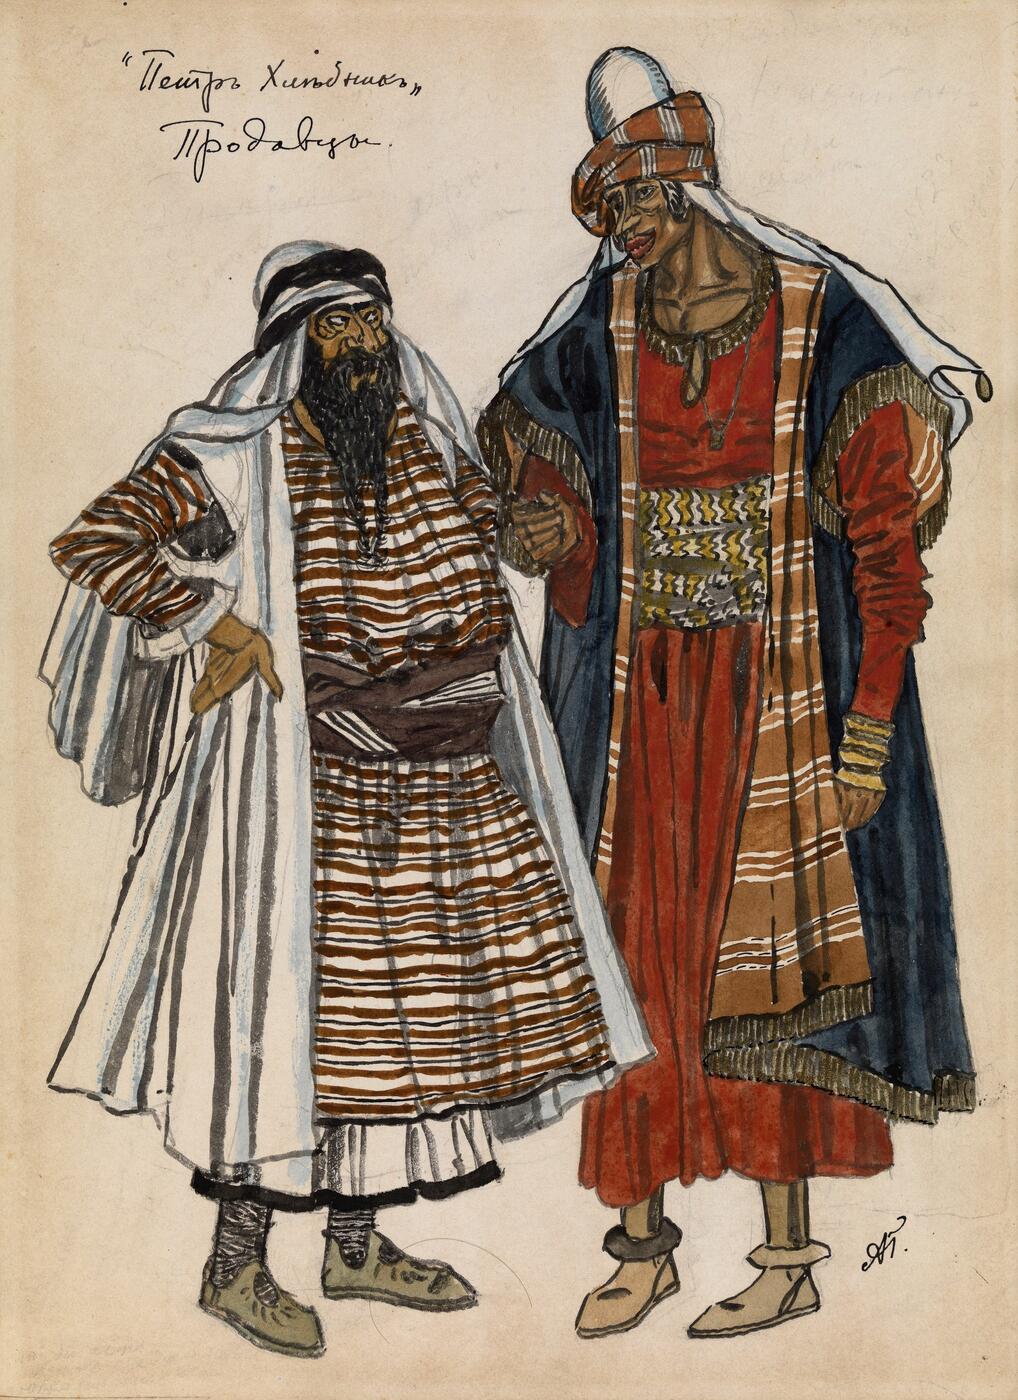 Costume Designs for the Salesmen from a Production of the Play "Peter Khlebnik" by Lev Tolstoy, directed by Vsevolod Meyerhold, Alexandrinsky Theatre, Petrograd, 1918